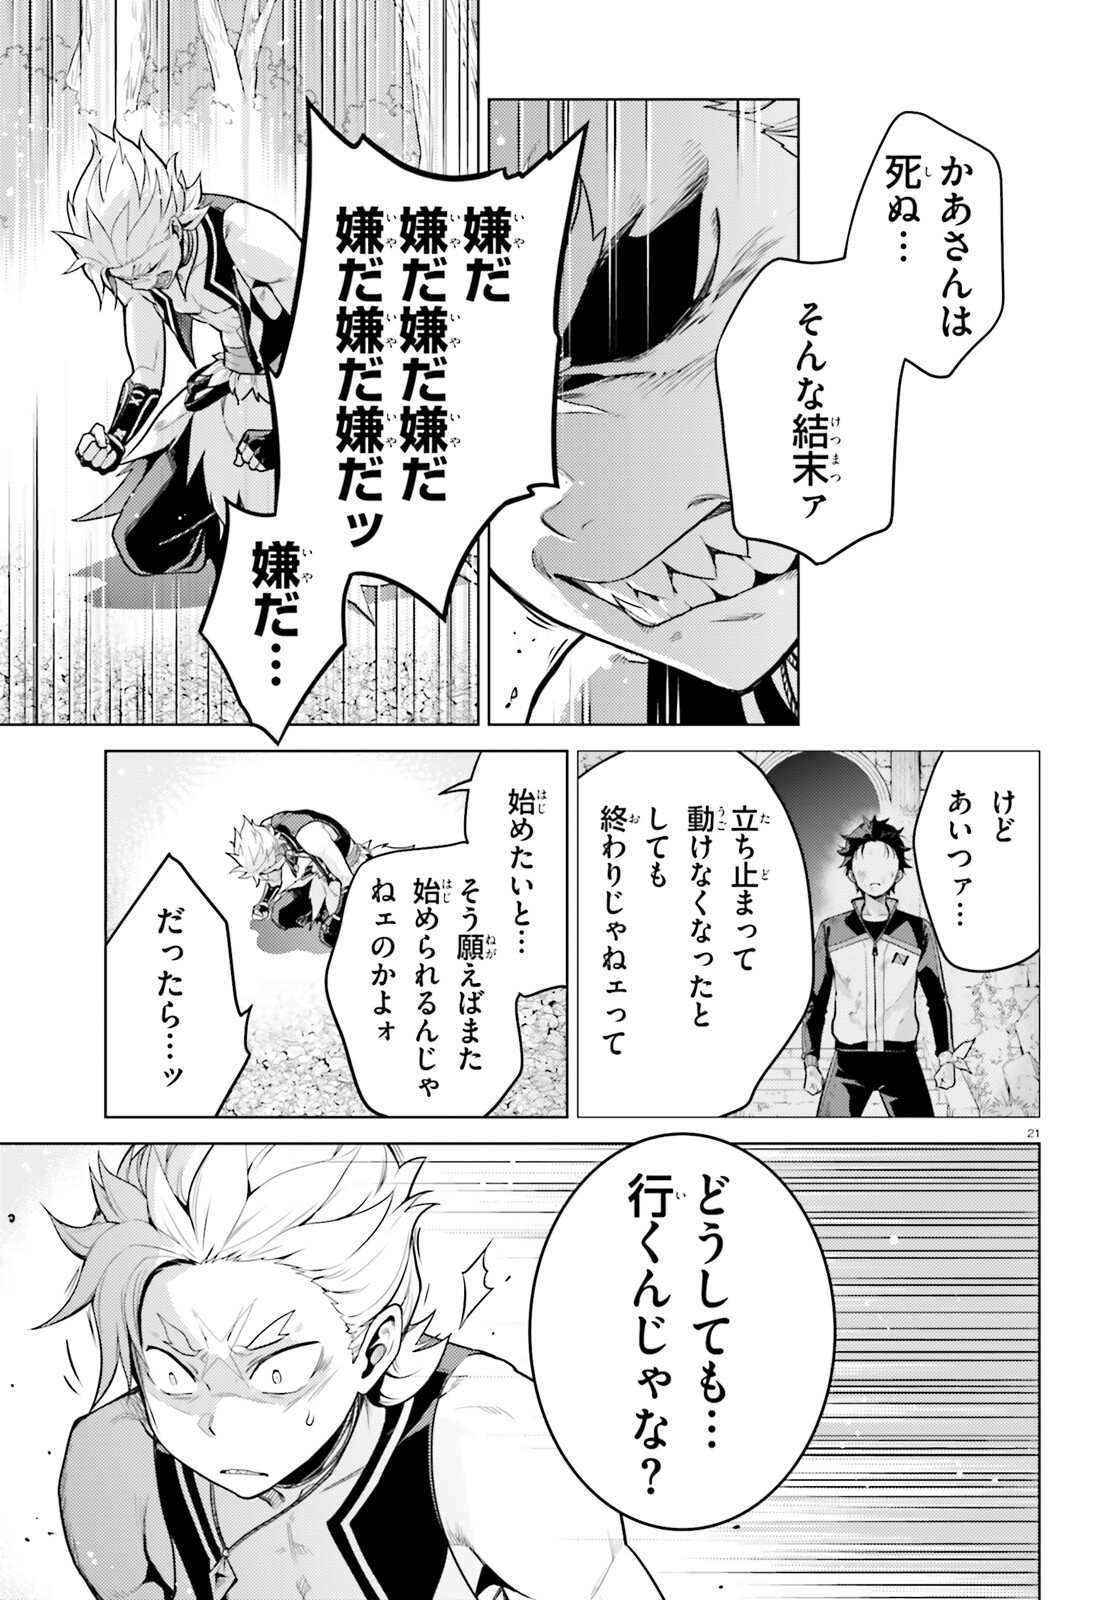 Reゼロから始める異世界生活 第四章 聖域と強欲の魔女 第49話 - Page 21